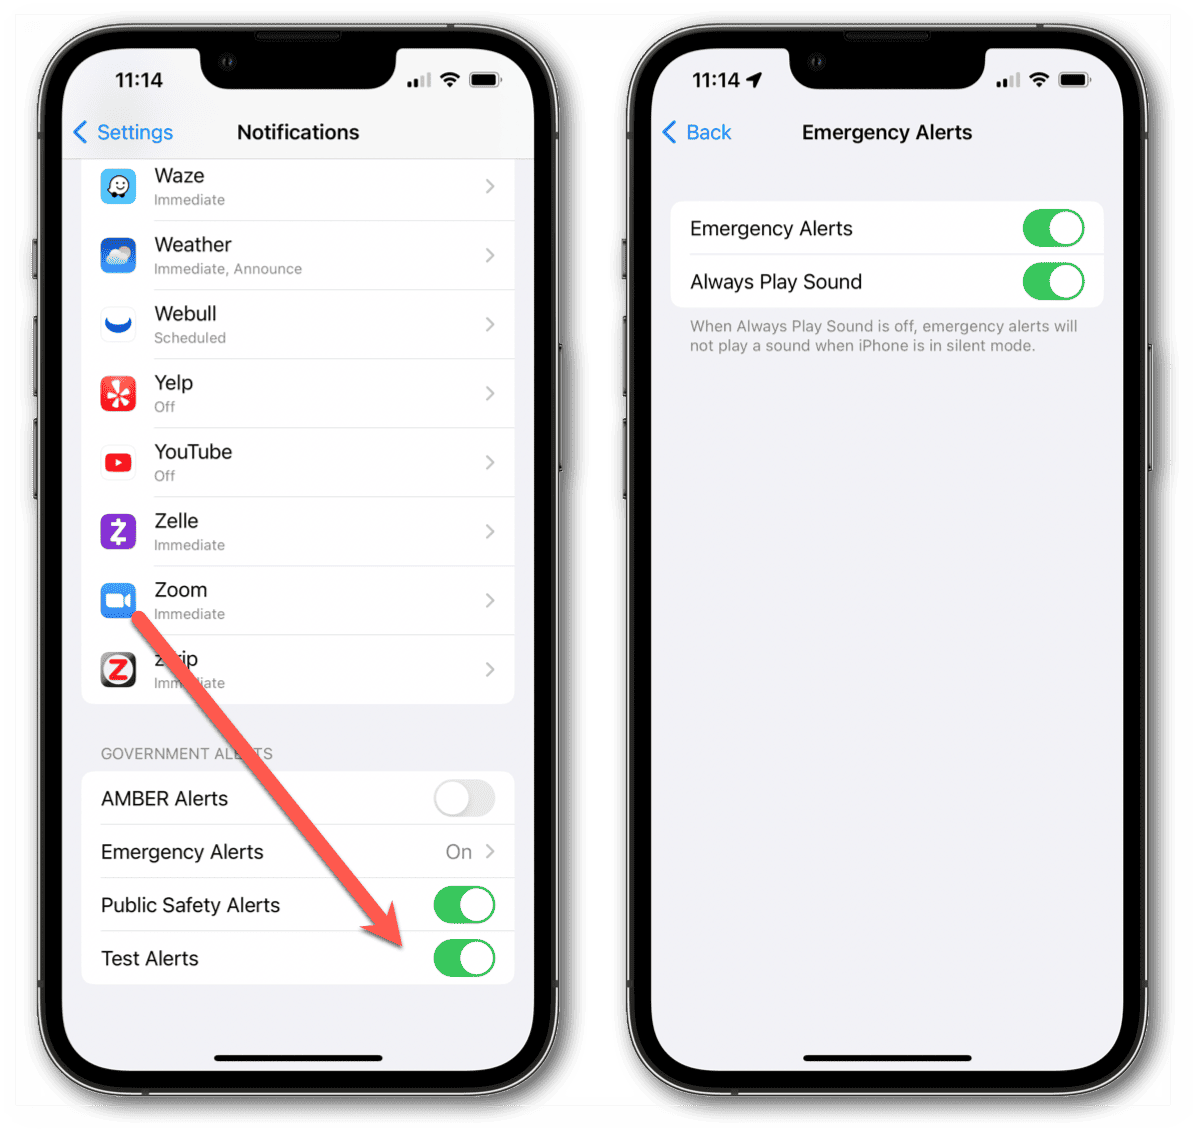 Apple Adds ‘Test Alerts’ Toggle to iPhone In Case You Really Want More Annoying Blasts of Sound